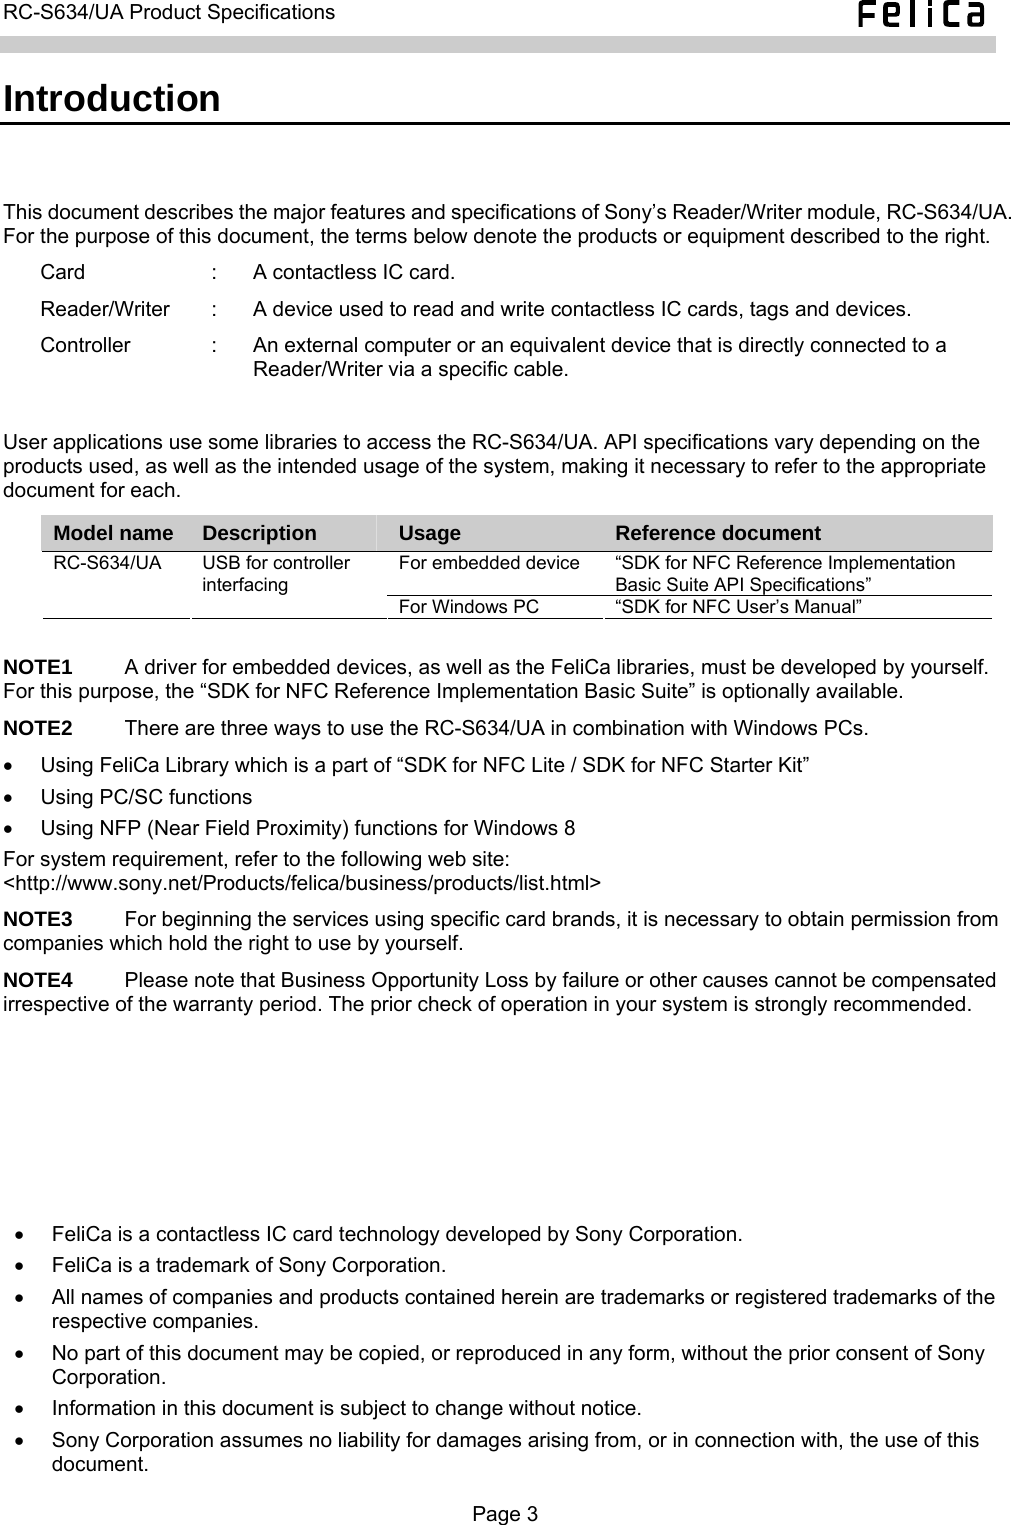   RC-S634/UA Product Specifications  Introduction This document describes the major features and specifications of Sony’s Reader/Writer module, RC-S634/UA. For the purpose of this document, the terms below denote the products or equipment described to the right. Card  :  A contactless IC card. Reader/Writer  :  A device used to read and write contactless IC cards, tags and devices. Controller  :  An external computer or an equivalent device that is directly connected to a Reader/Writer via a specific cable.  User applications use some libraries to access the RC-S634/UA. API specifications vary depending on the products used, as well as the intended usage of the system, making it necessary to refer to the appropriate document for each. Model name  Description  Usage  Reference document For embedded device  “SDK for NFC Reference Implementation Basic Suite API Specifications” RC-S634/UA  USB for controller interfacing For Windows PC  “SDK for NFC User’s Manual”  NOTE1          A driver for embedded devices, as well as the FeliCa libraries, must be developed by yourself. For this purpose, the “SDK for NFC Reference Implementation Basic Suite” is optionally available. NOTE2          There are three ways to use the RC-S634/UA in combination with Windows PCs. •  Using FeliCa Library which is a part of “SDK for NFC Lite / SDK for NFC Starter Kit” •  Using PC/SC functions •  Using NFP (Near Field Proximity) functions for Windows 8 For system requirement, refer to the following web site: &lt;http://www.sony.net/Products/felica/business/products/list.html&gt; NOTE3     For beginning the services using specific card brands, it is necessary to obtain permission from companies which hold the right to use by yourself. NOTE4     Please note that Business Opportunity Loss by failure or other causes cannot be compensated irrespective of the warranty period. The prior check of operation in your system is strongly recommended.  •  FeliCa is a contactless IC card technology developed by Sony Corporation. •  FeliCa is a trademark of Sony Corporation. •  All names of companies and products contained herein are trademarks or registered trademarks of the respective companies. •  No part of this document may be copied, or reproduced in any form, without the prior consent of Sony Corporation. •  Information in this document is subject to change without notice. •  Sony Corporation assumes no liability for damages arising from, or in connection with, the use of this document.  Page 3  